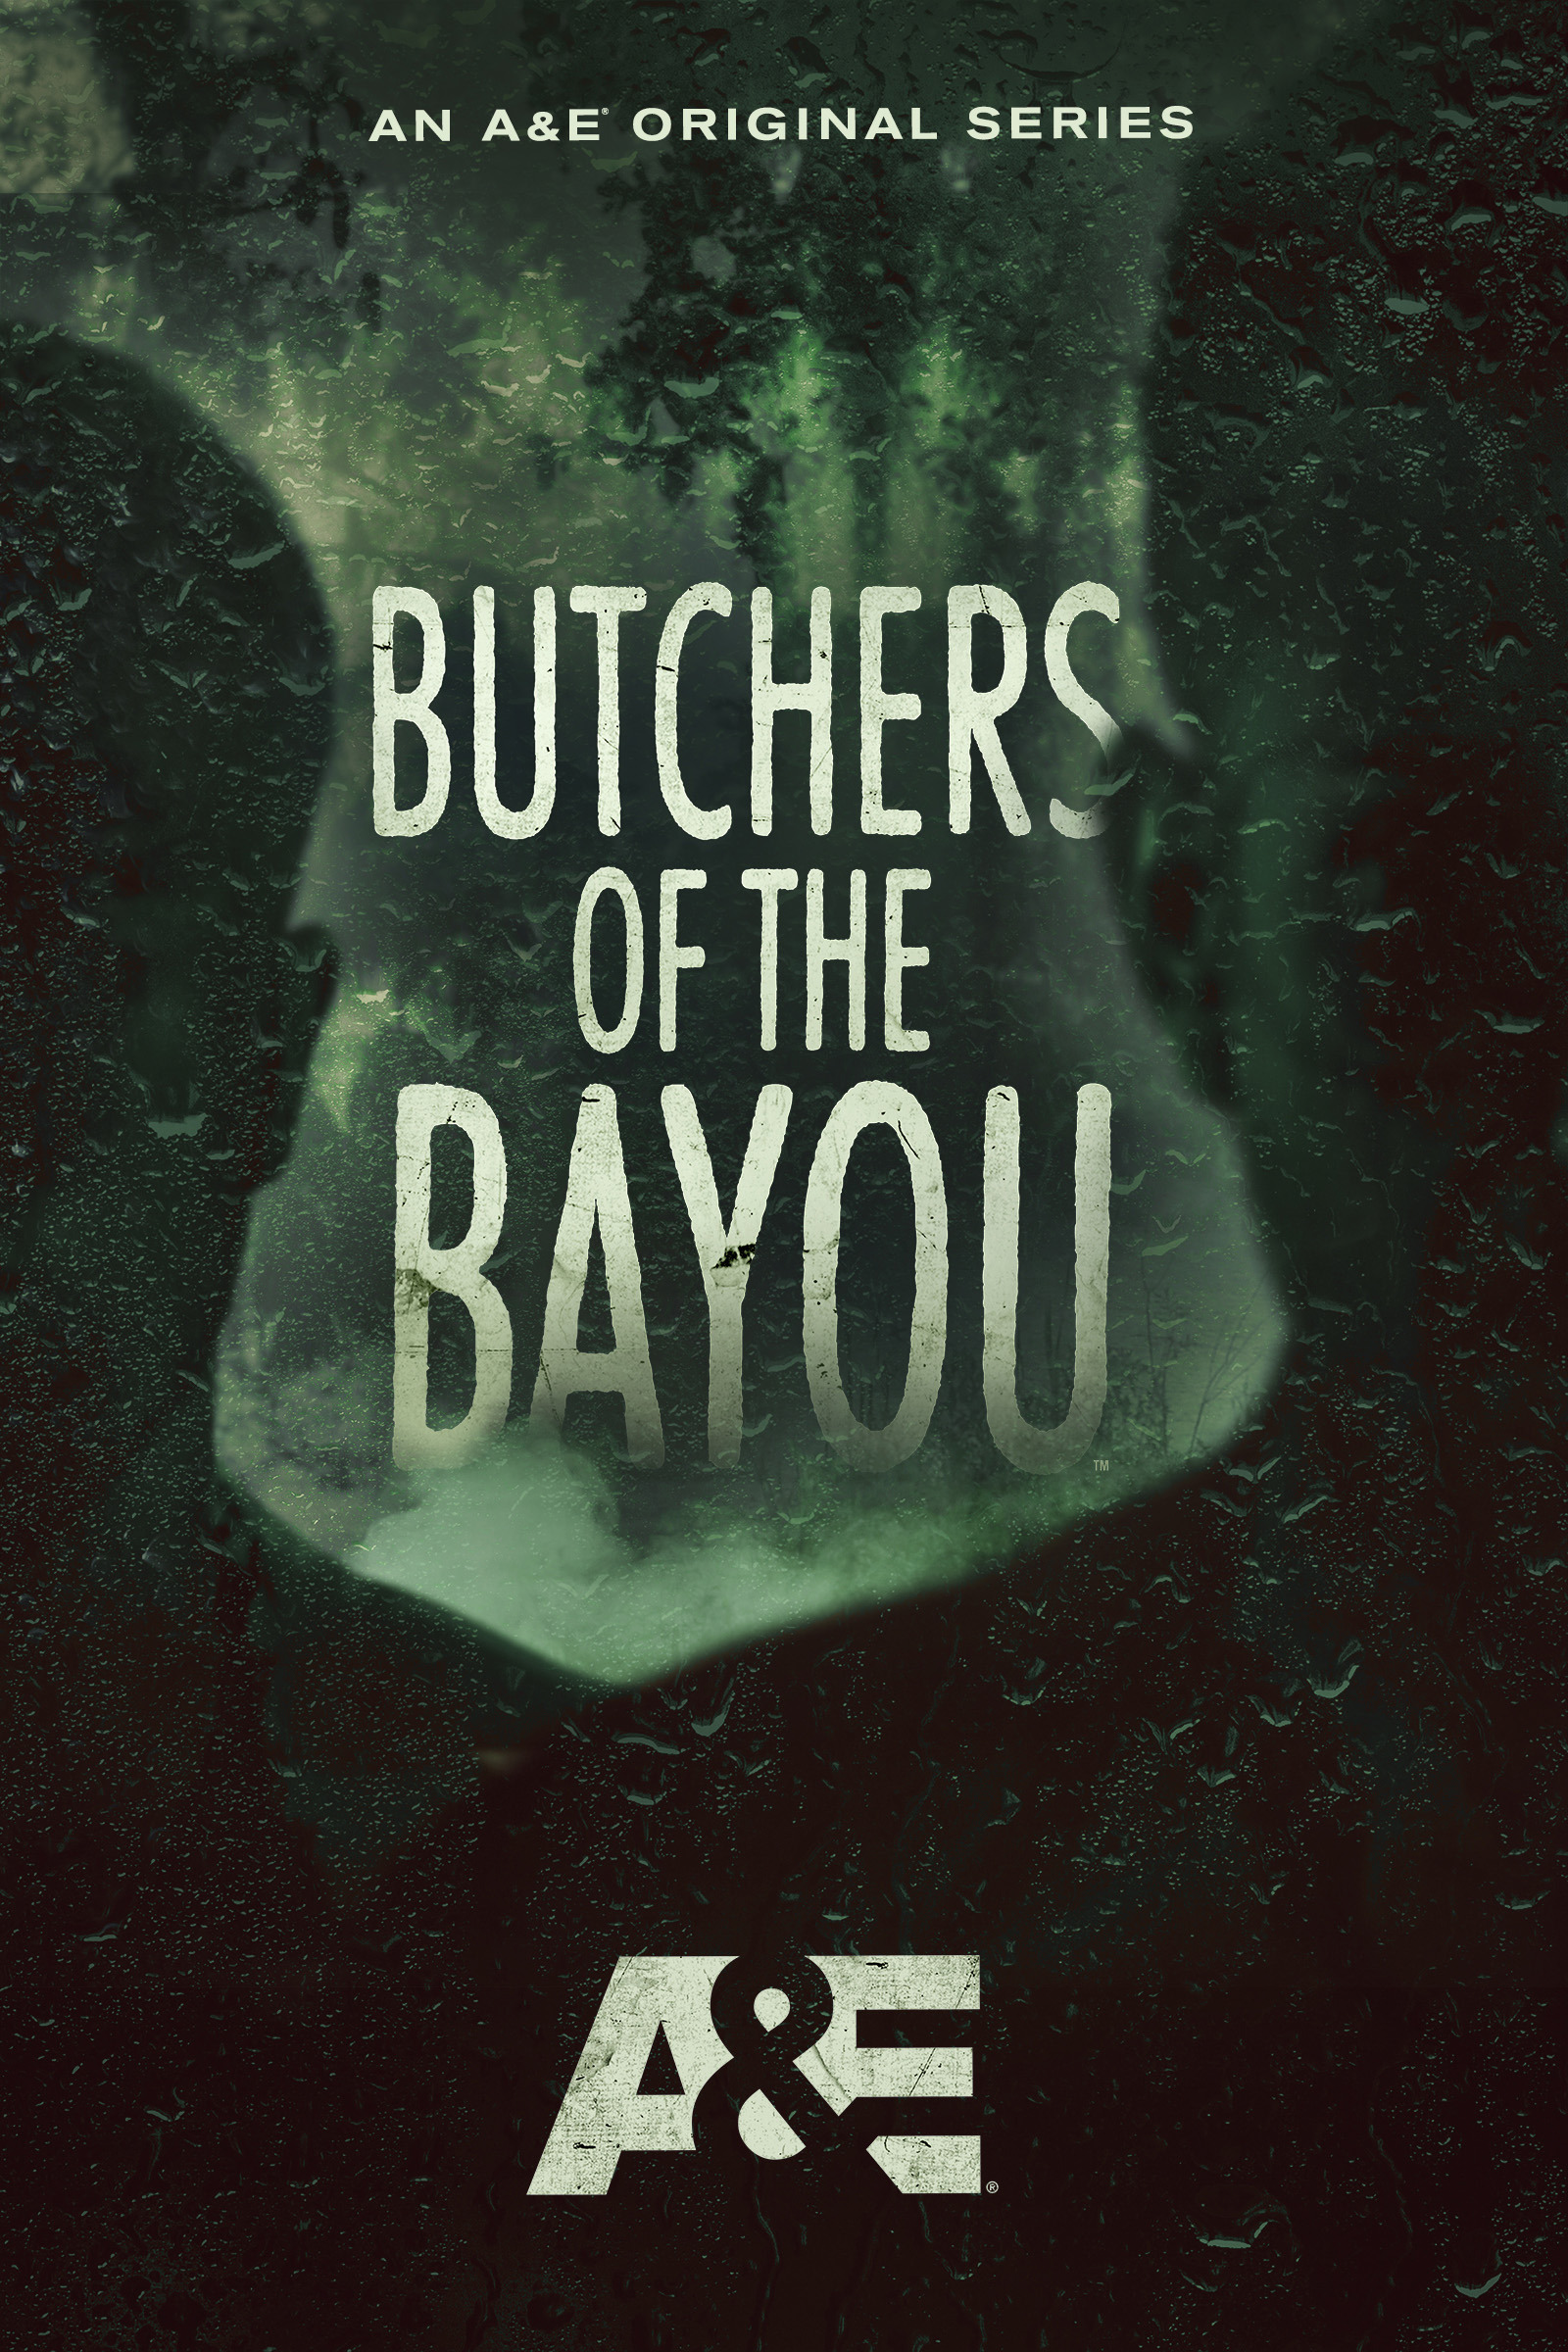 Mega Sized TV Poster Image for Butchers of the Bayou 